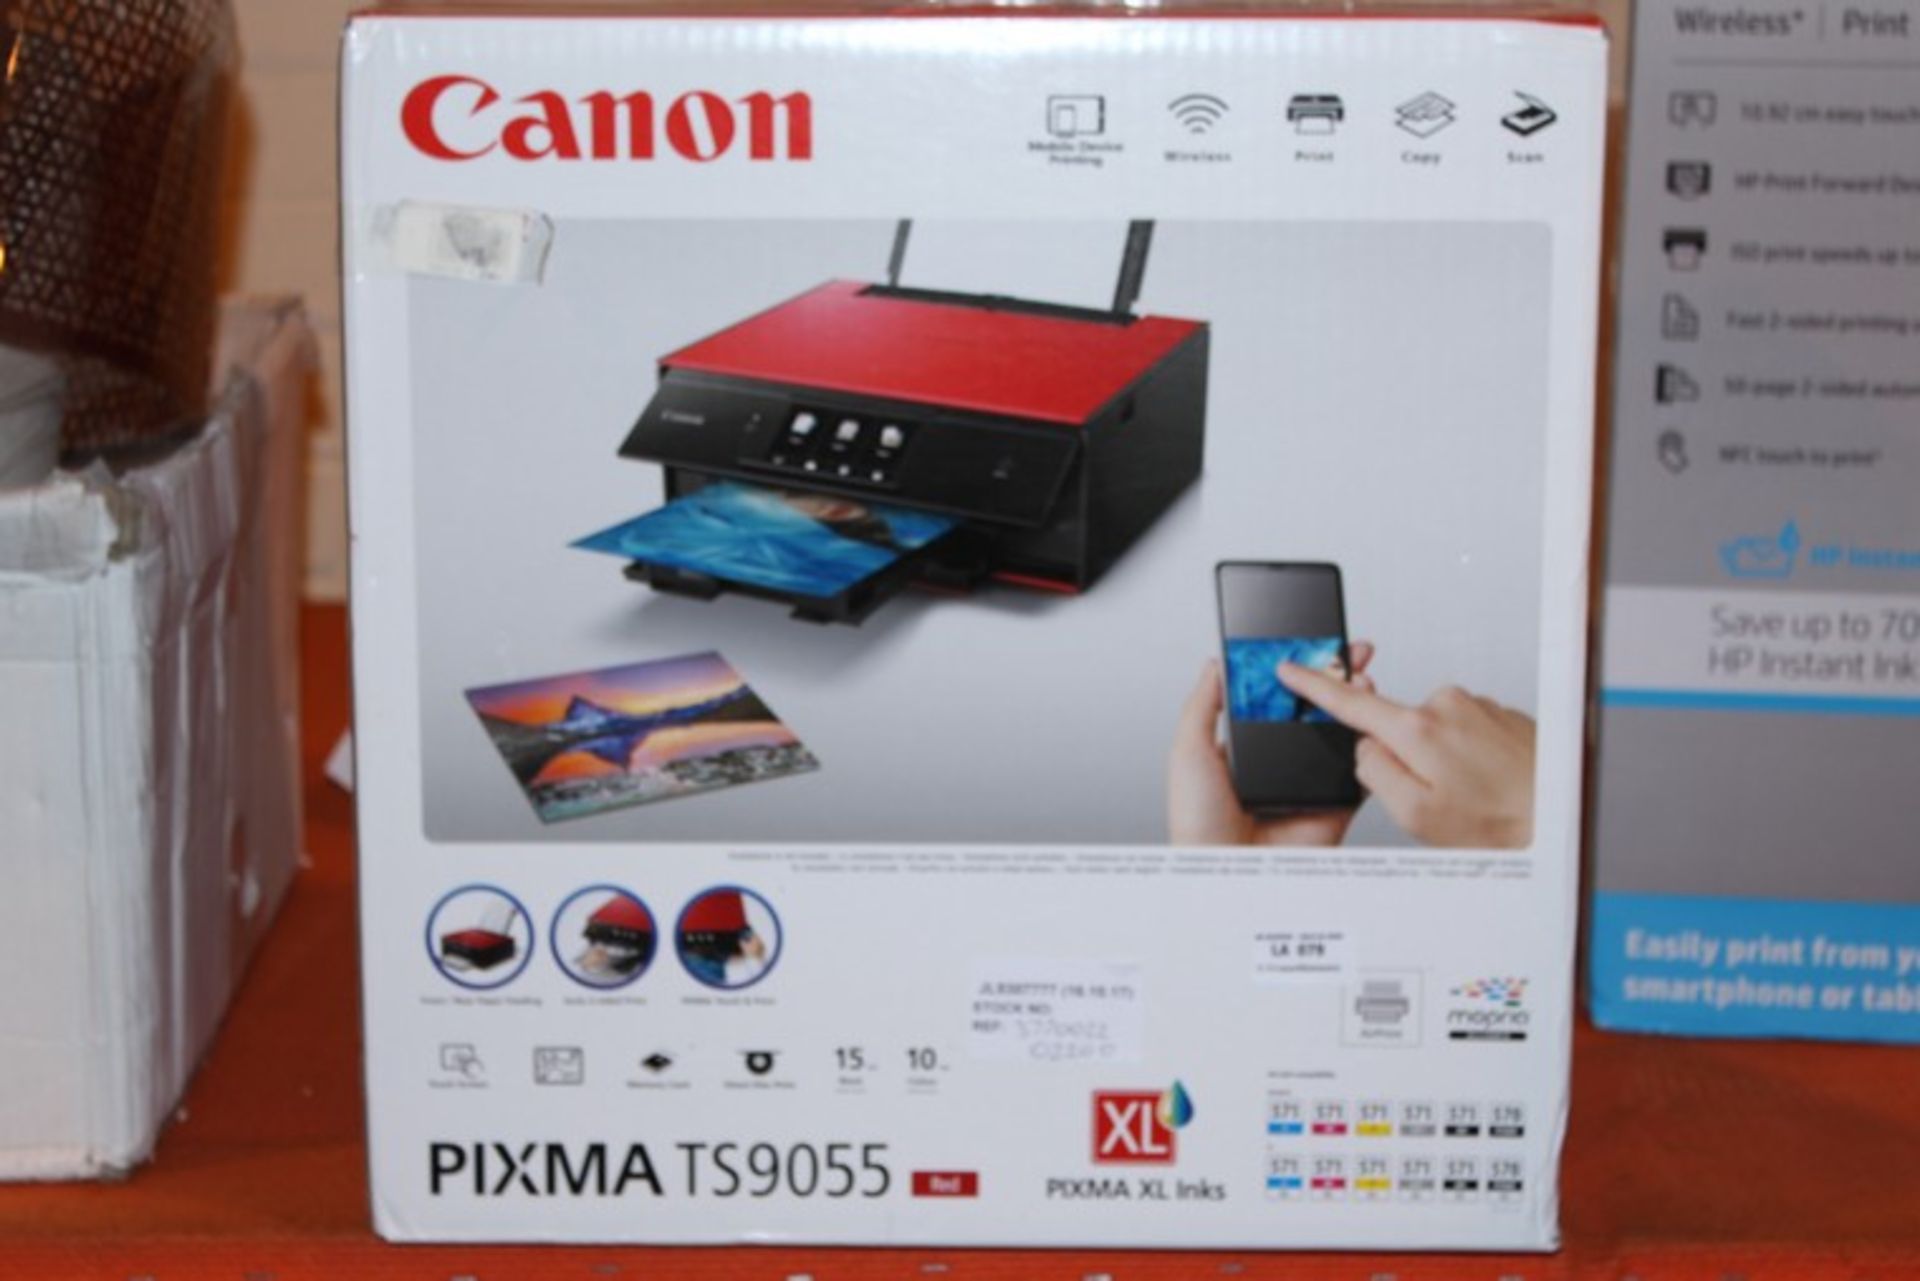 1 x BOXED CANNON PIXMA TS9055 MOBILE DEVICE PRINTING RRP £220 (16.10.17) (3770022) *PLEASE NOTE THAT